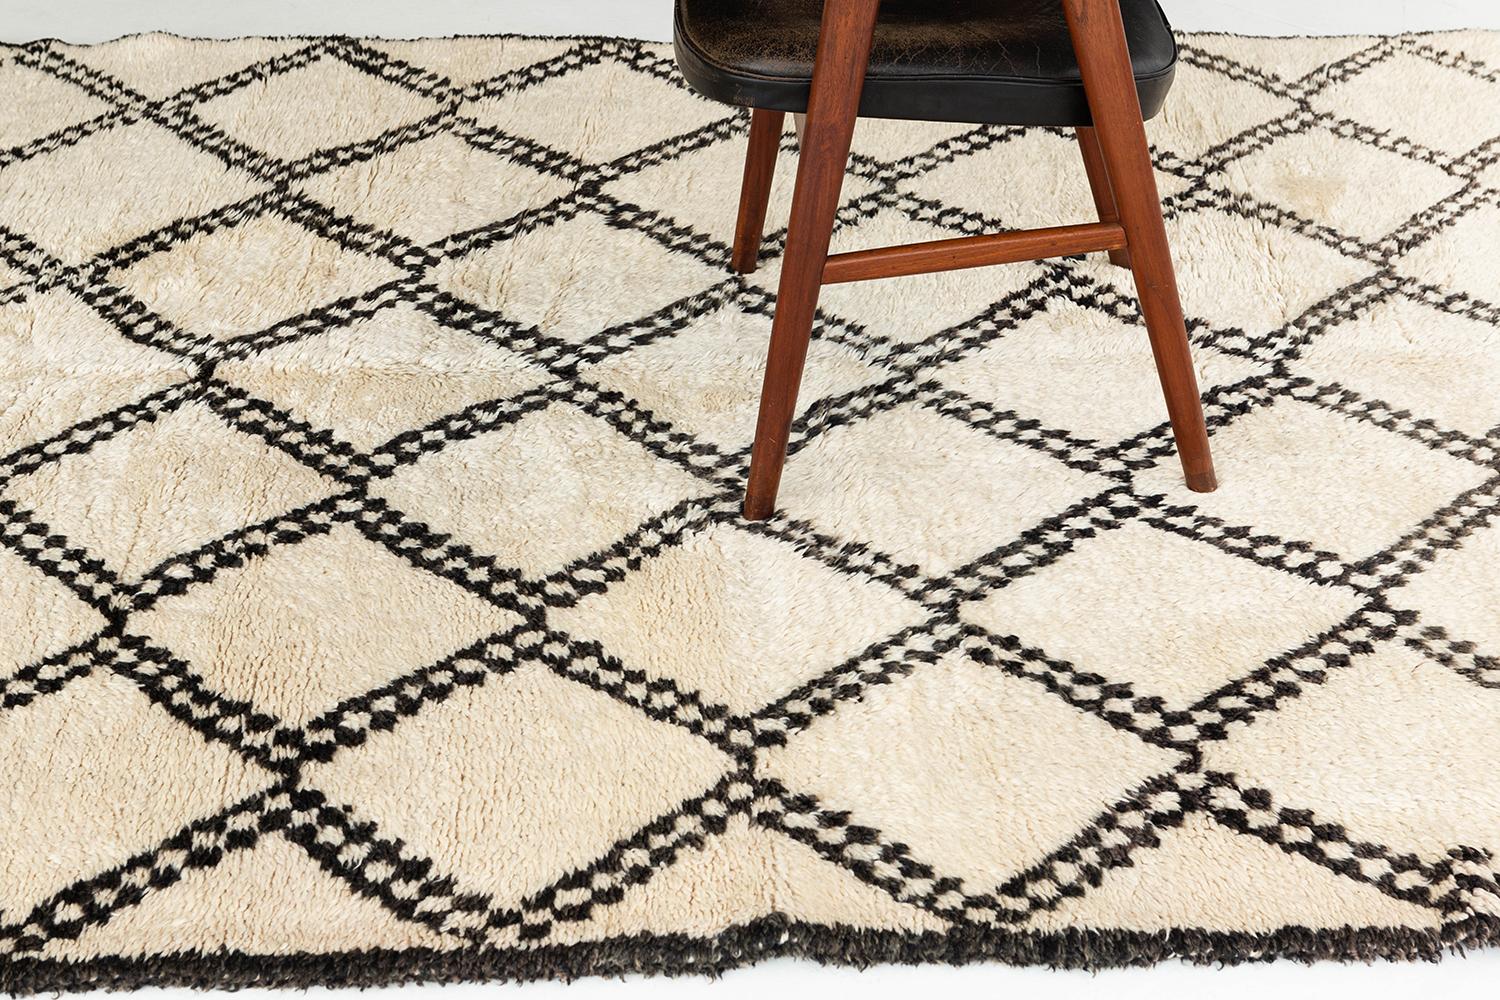 Ivory pile field with diamond lattice pattern rendered in alternating dark brown and ivory with rows of embellishments at the bottom of the rug. This is a unique vintage rug from the Beni Ourain peoples of Morocco.